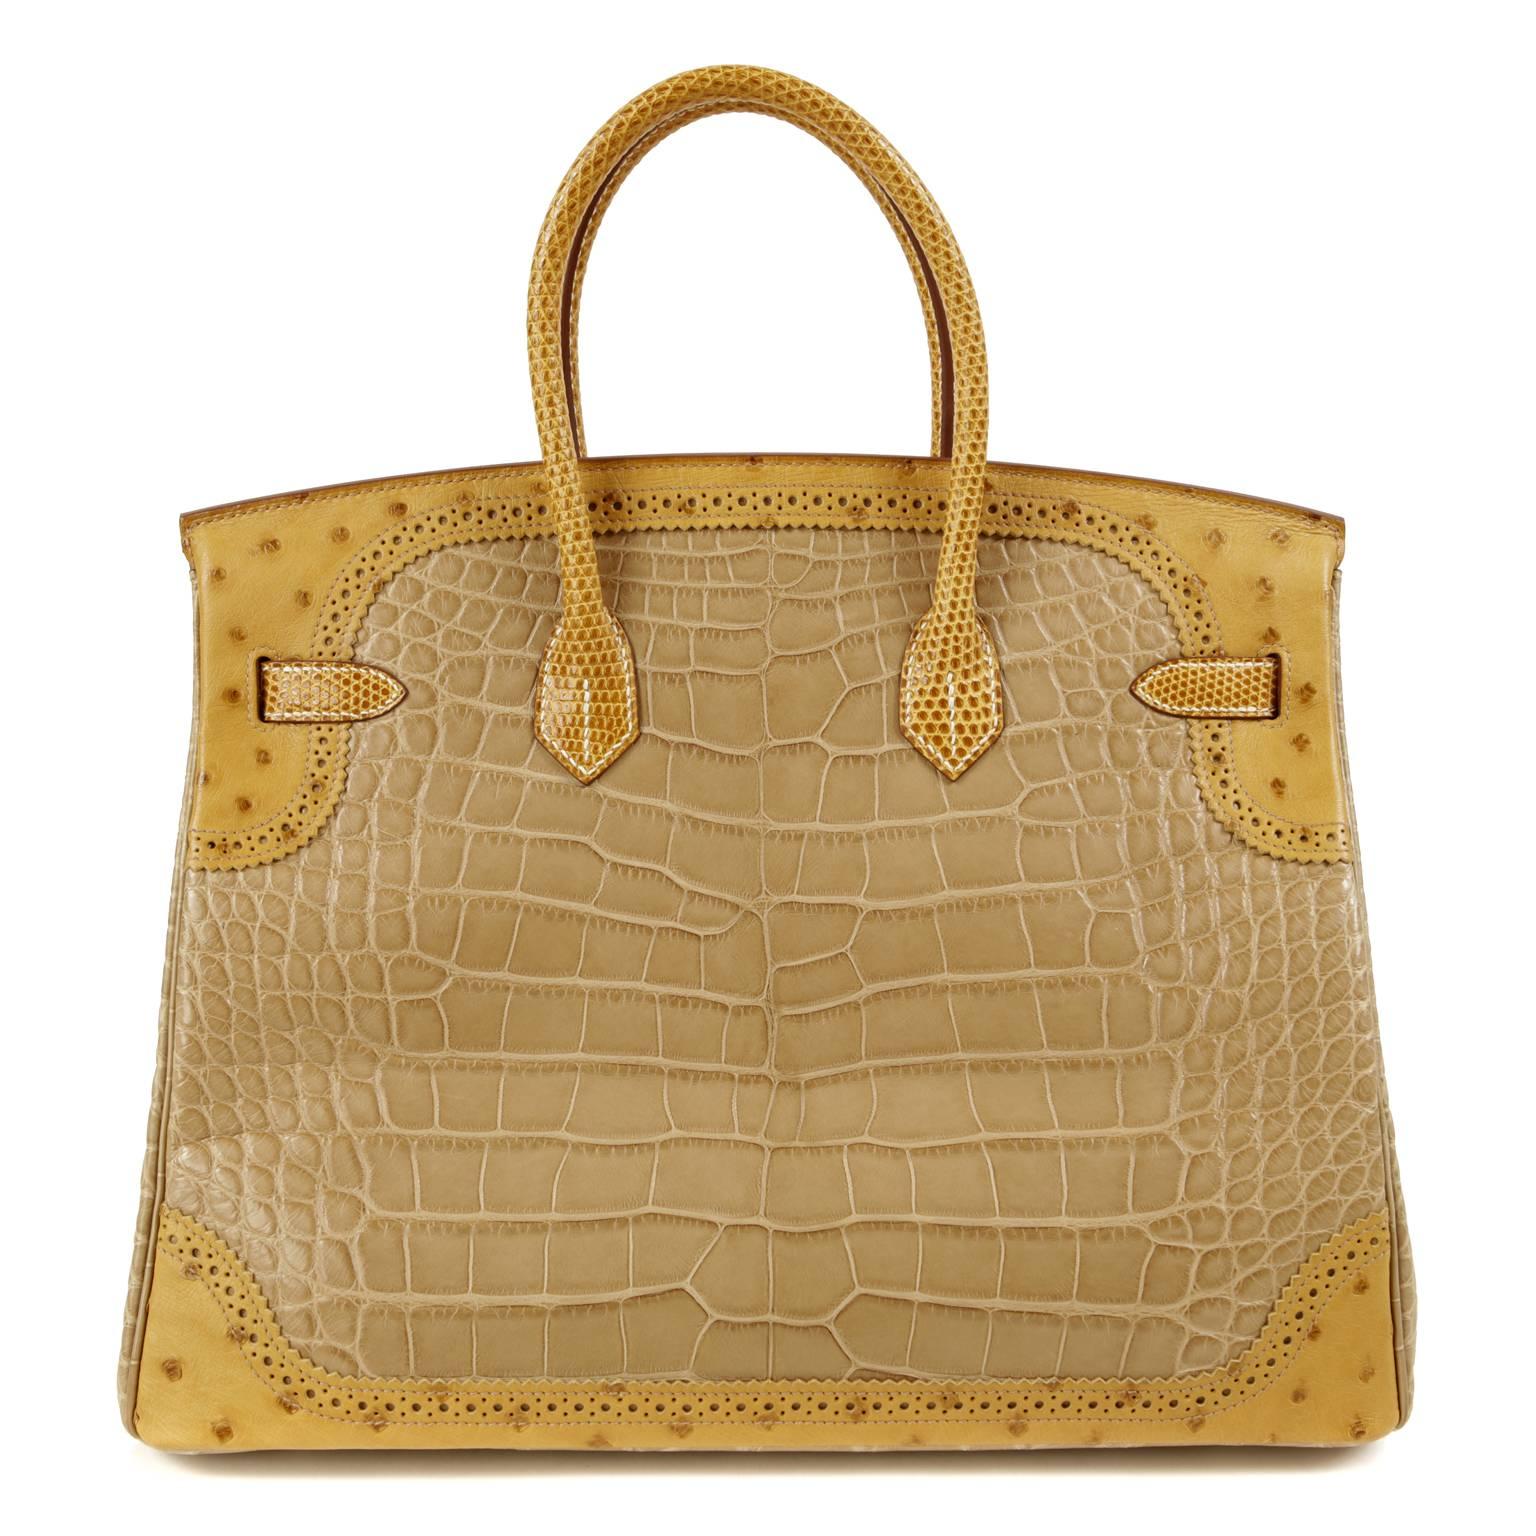 Hermès Grand Marriage Tri Skin Ghillies 35 cm Birkin- PRISTINE condition with the plastic intact on much of the hardware.  The extremely rare style is crafted from three neutral exotic skins: matte alligator, ostrich and lizard.  A truly